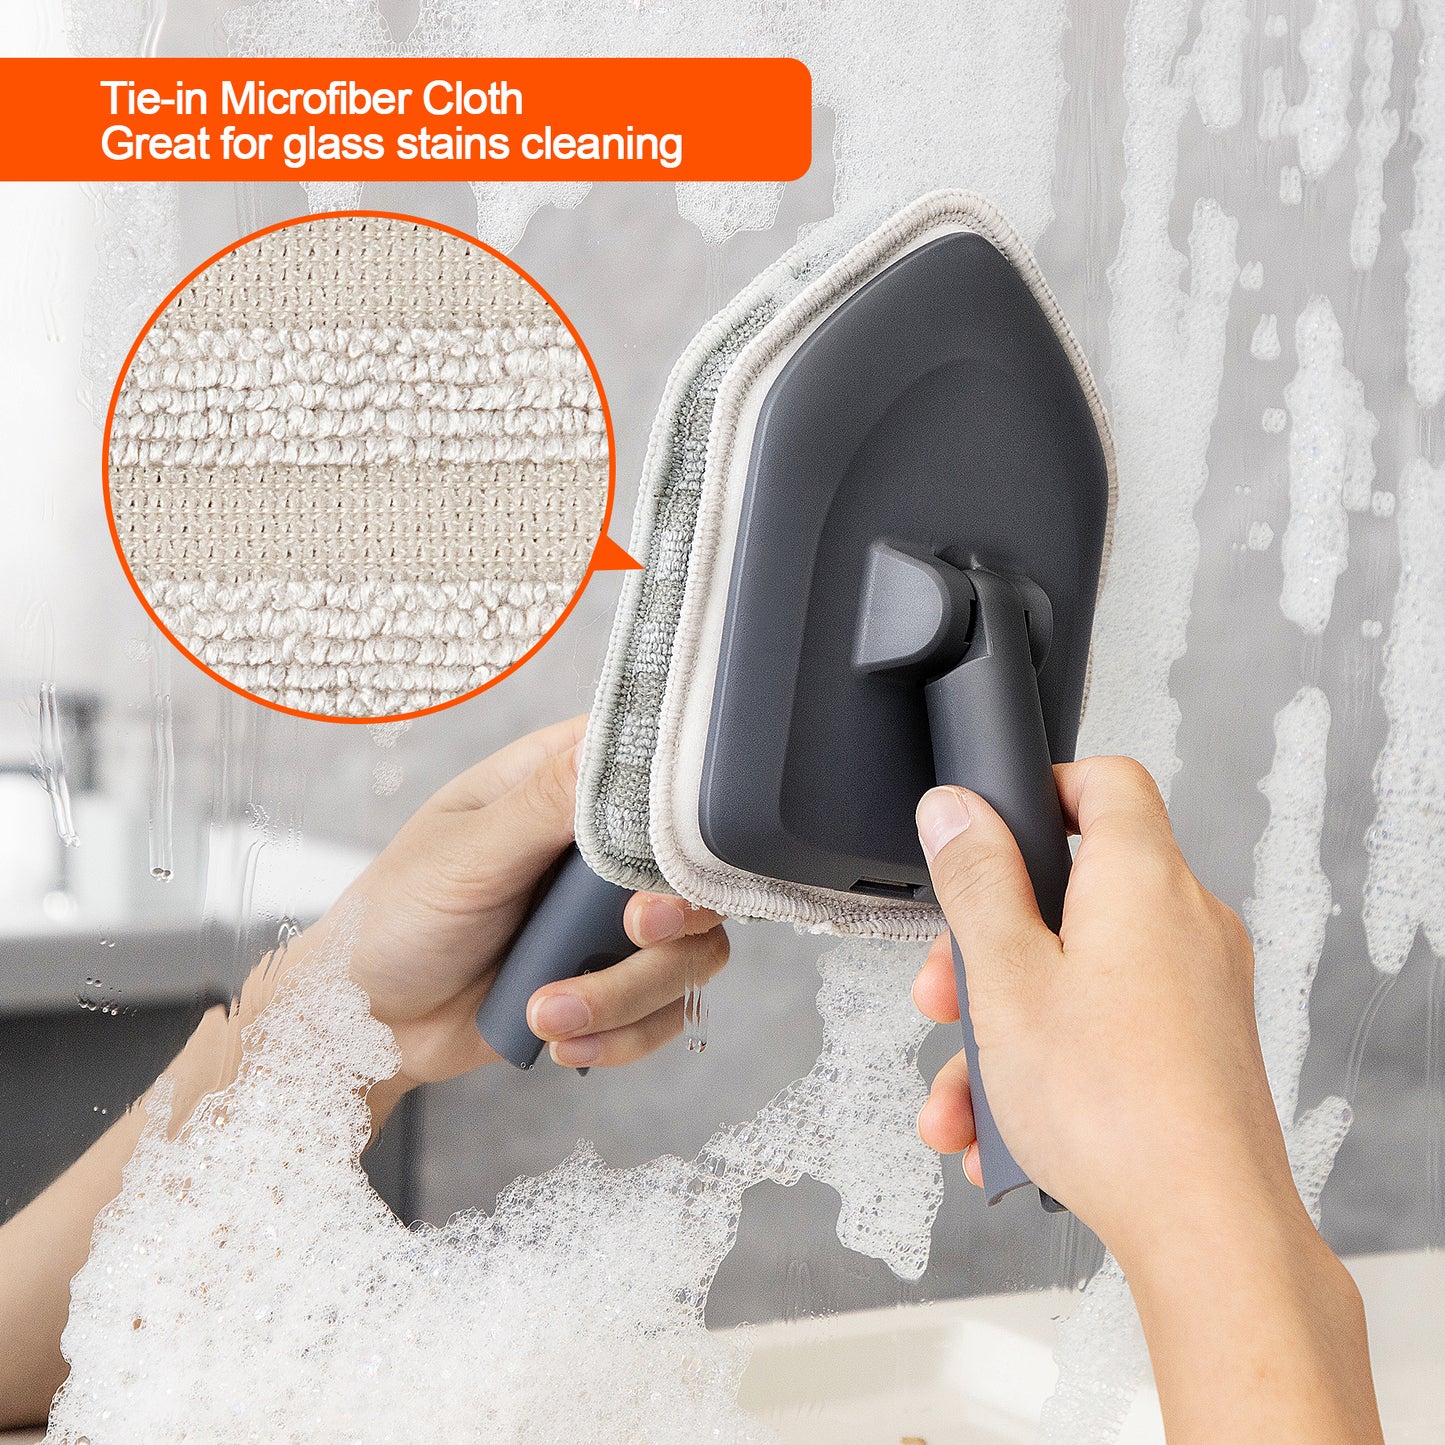 CLEANHOME Tile Tub Scrubber Brush with 3 Different Function Cleaning Heads and 52" Extendable Long Handle-No Scratch Shower Brush for Cleaning Bathroom Kitchen Toilet Wall Sink,Grey